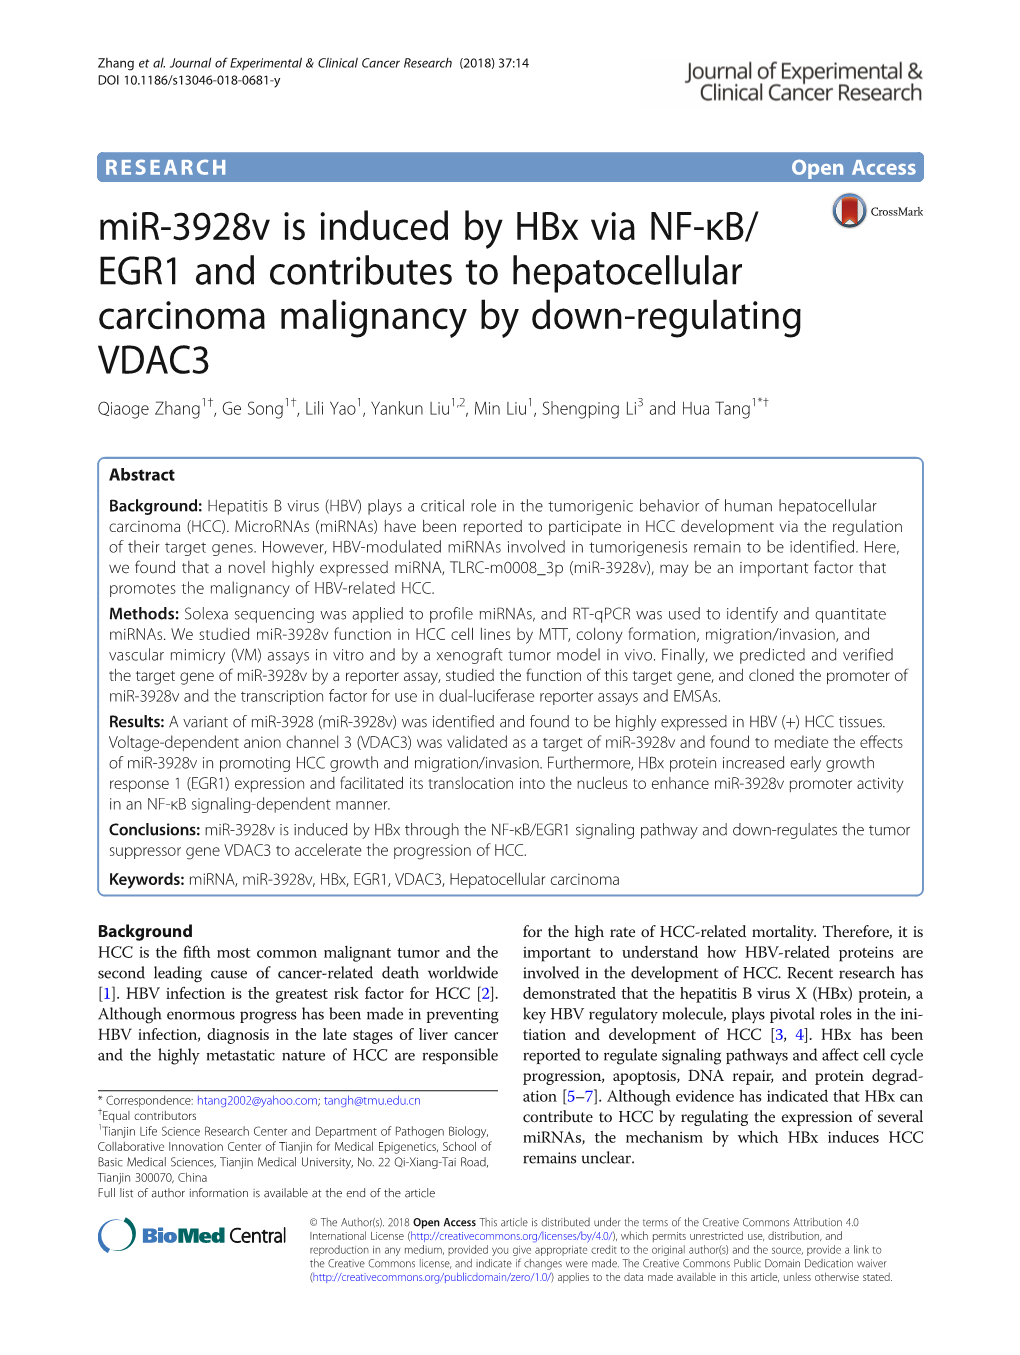 Mir-3928V Is Induced by Hbx Via NF-Κb/EGR1 and Contributes To